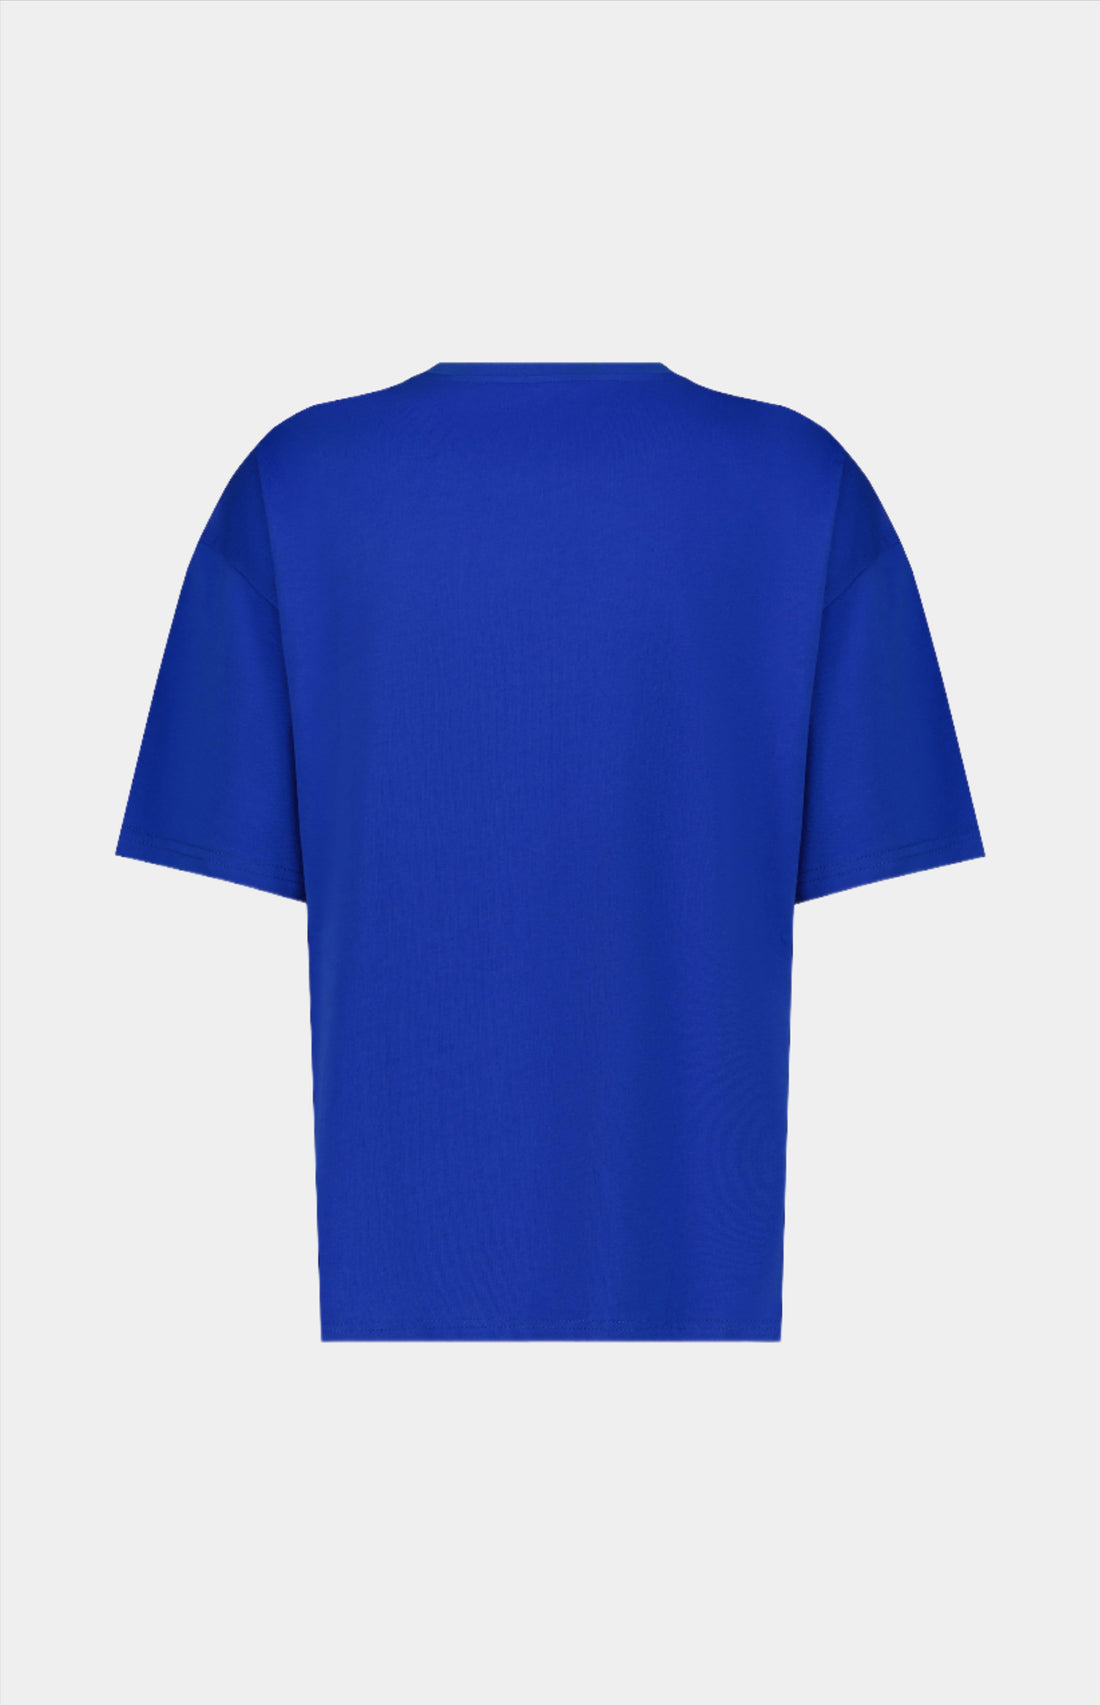 Elevate your style with our Premium T-Shirt. Heavy-weight, soft, and comfortable 100% luxury-weight 250GSM fabric expertly crafted in Portugal with attention to detail. Machine wash cold, hang to dry for best results. Choose your normal size for an oversized fit or size down for a regular fit. A unique and stylish addition to your wardrobe.